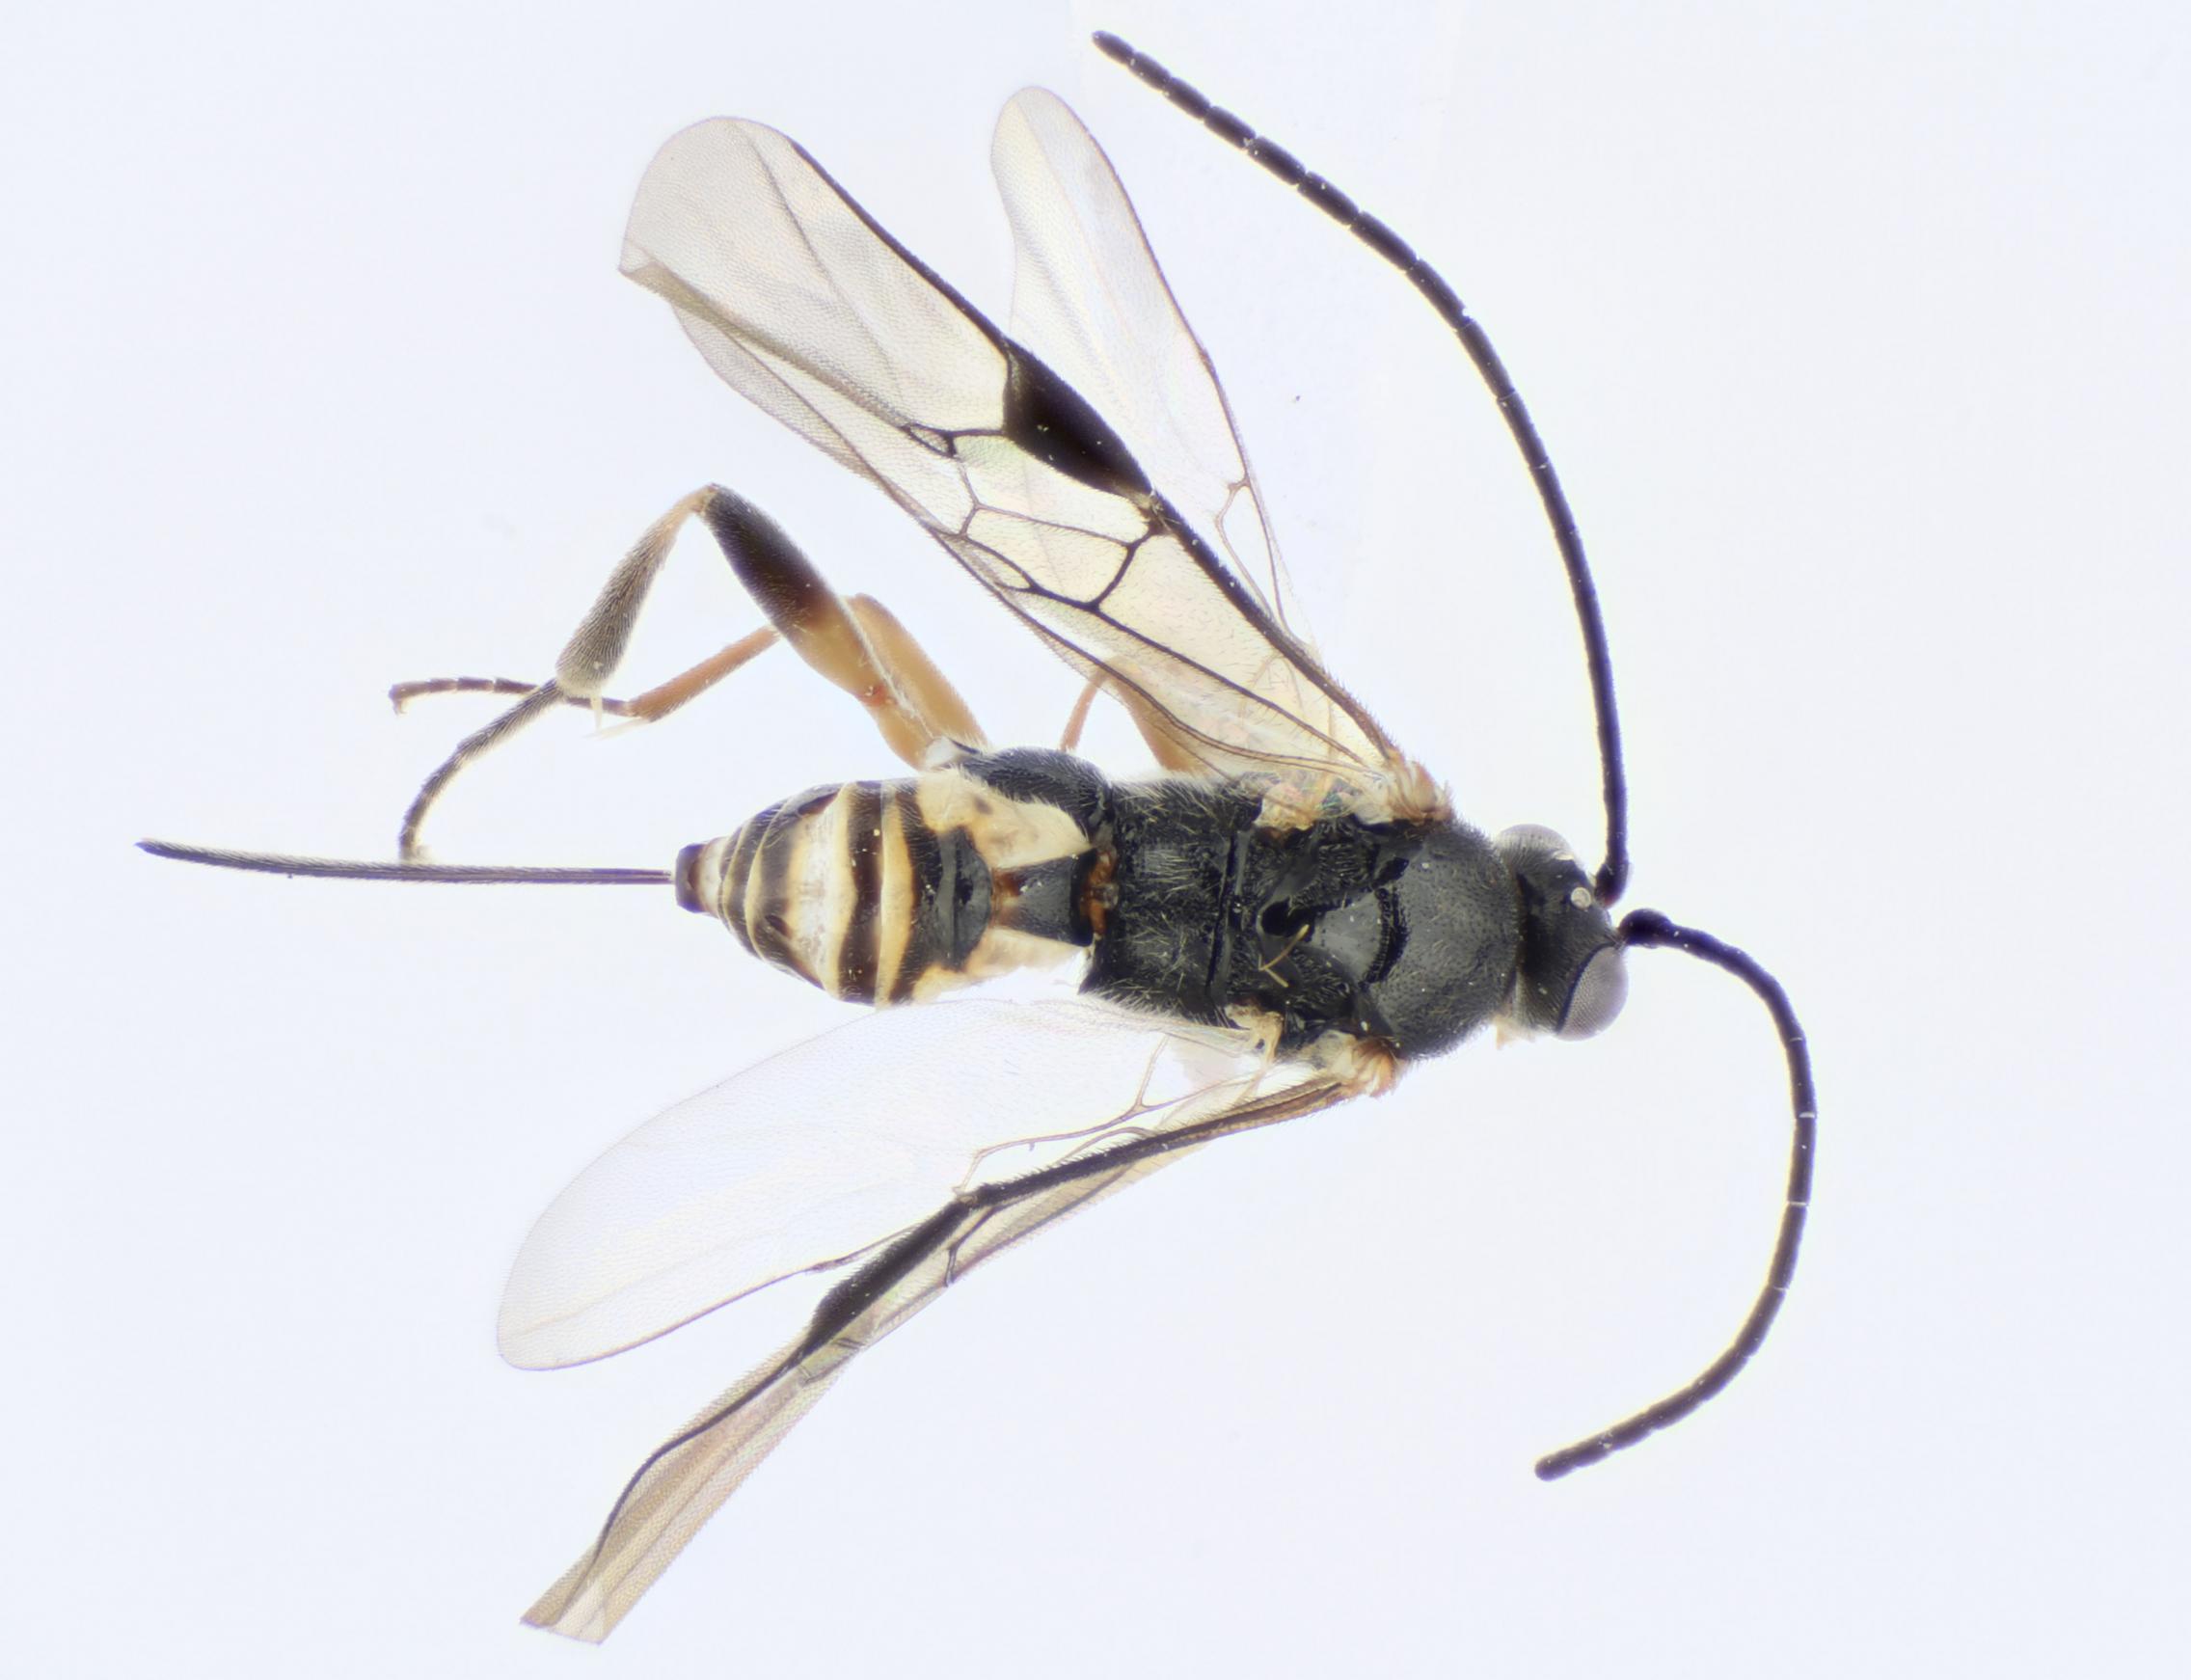 School students discover four new species of wasp, Newsroom